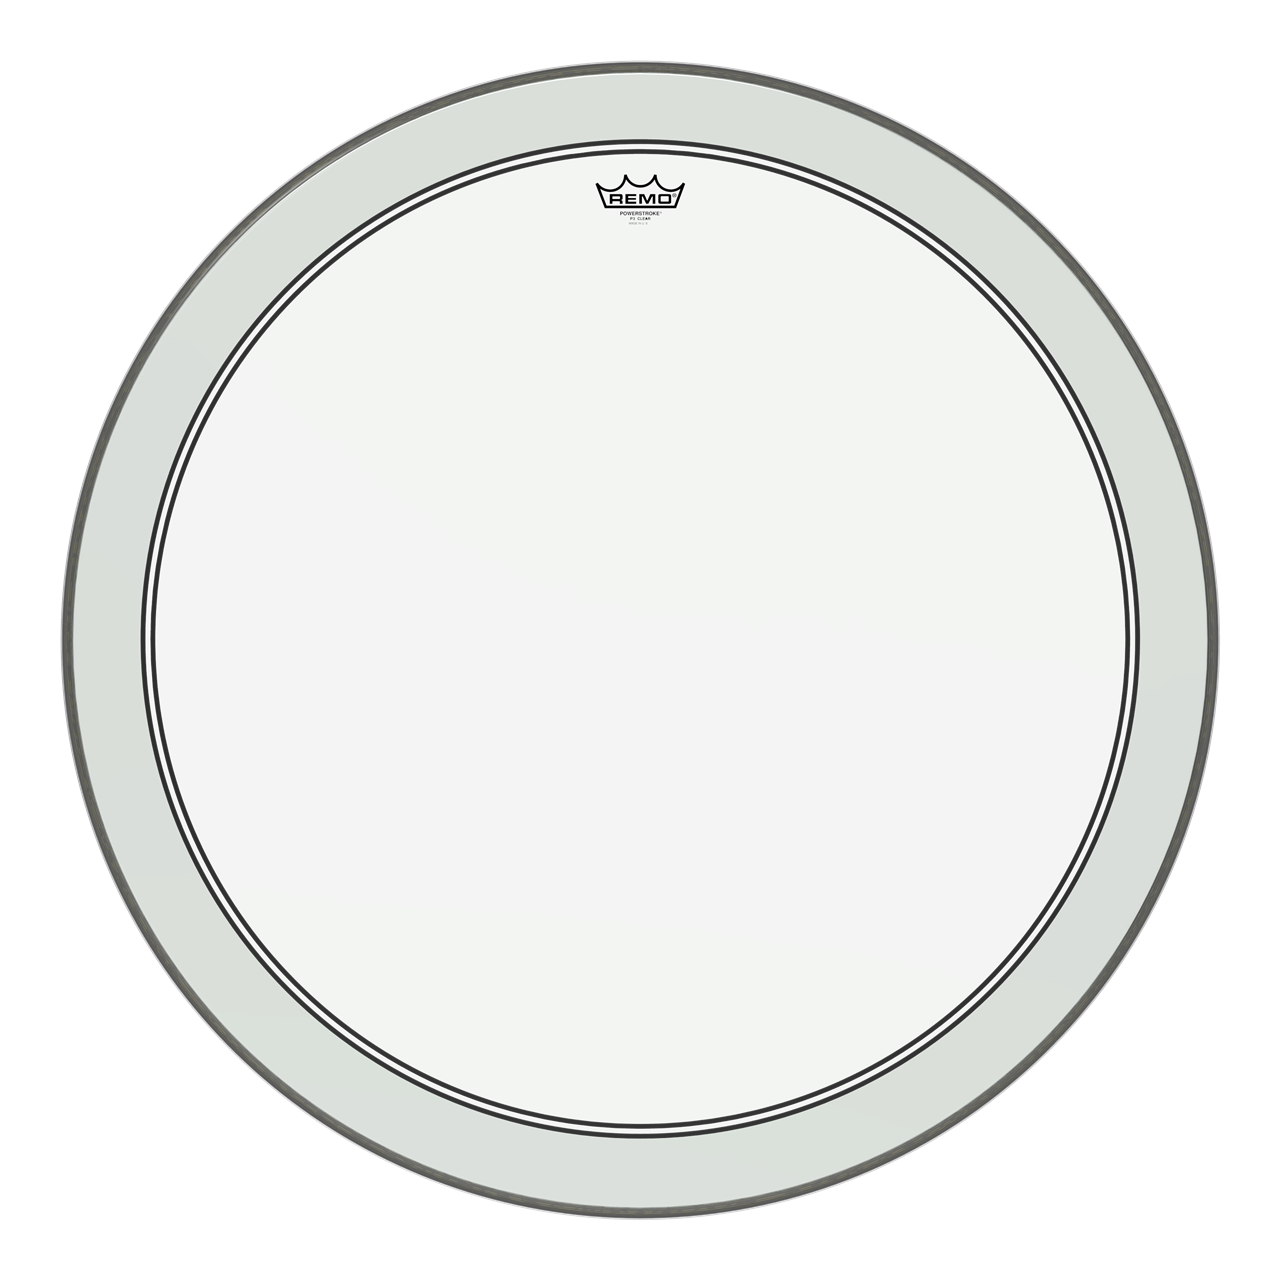 Remo P3-1318-C2 Powerstroke3 Clear, 18" Bass Drum Fell